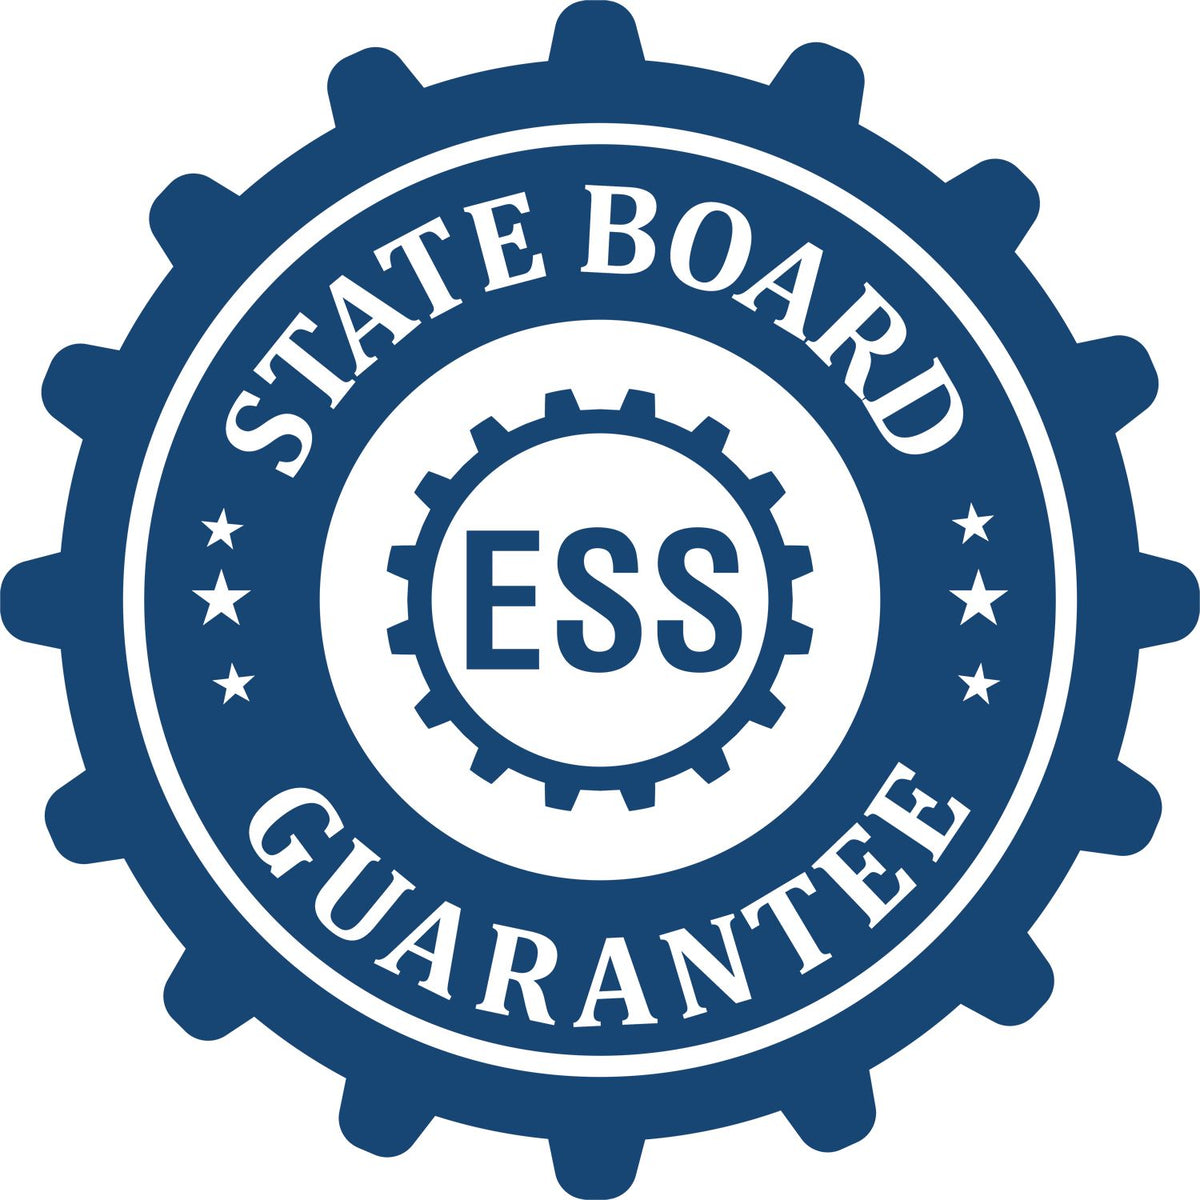 An emblem in a gear shape illustrating a state board guarantee for the Wooden Handle Kentucky State Seal Notary Public Stamp product.